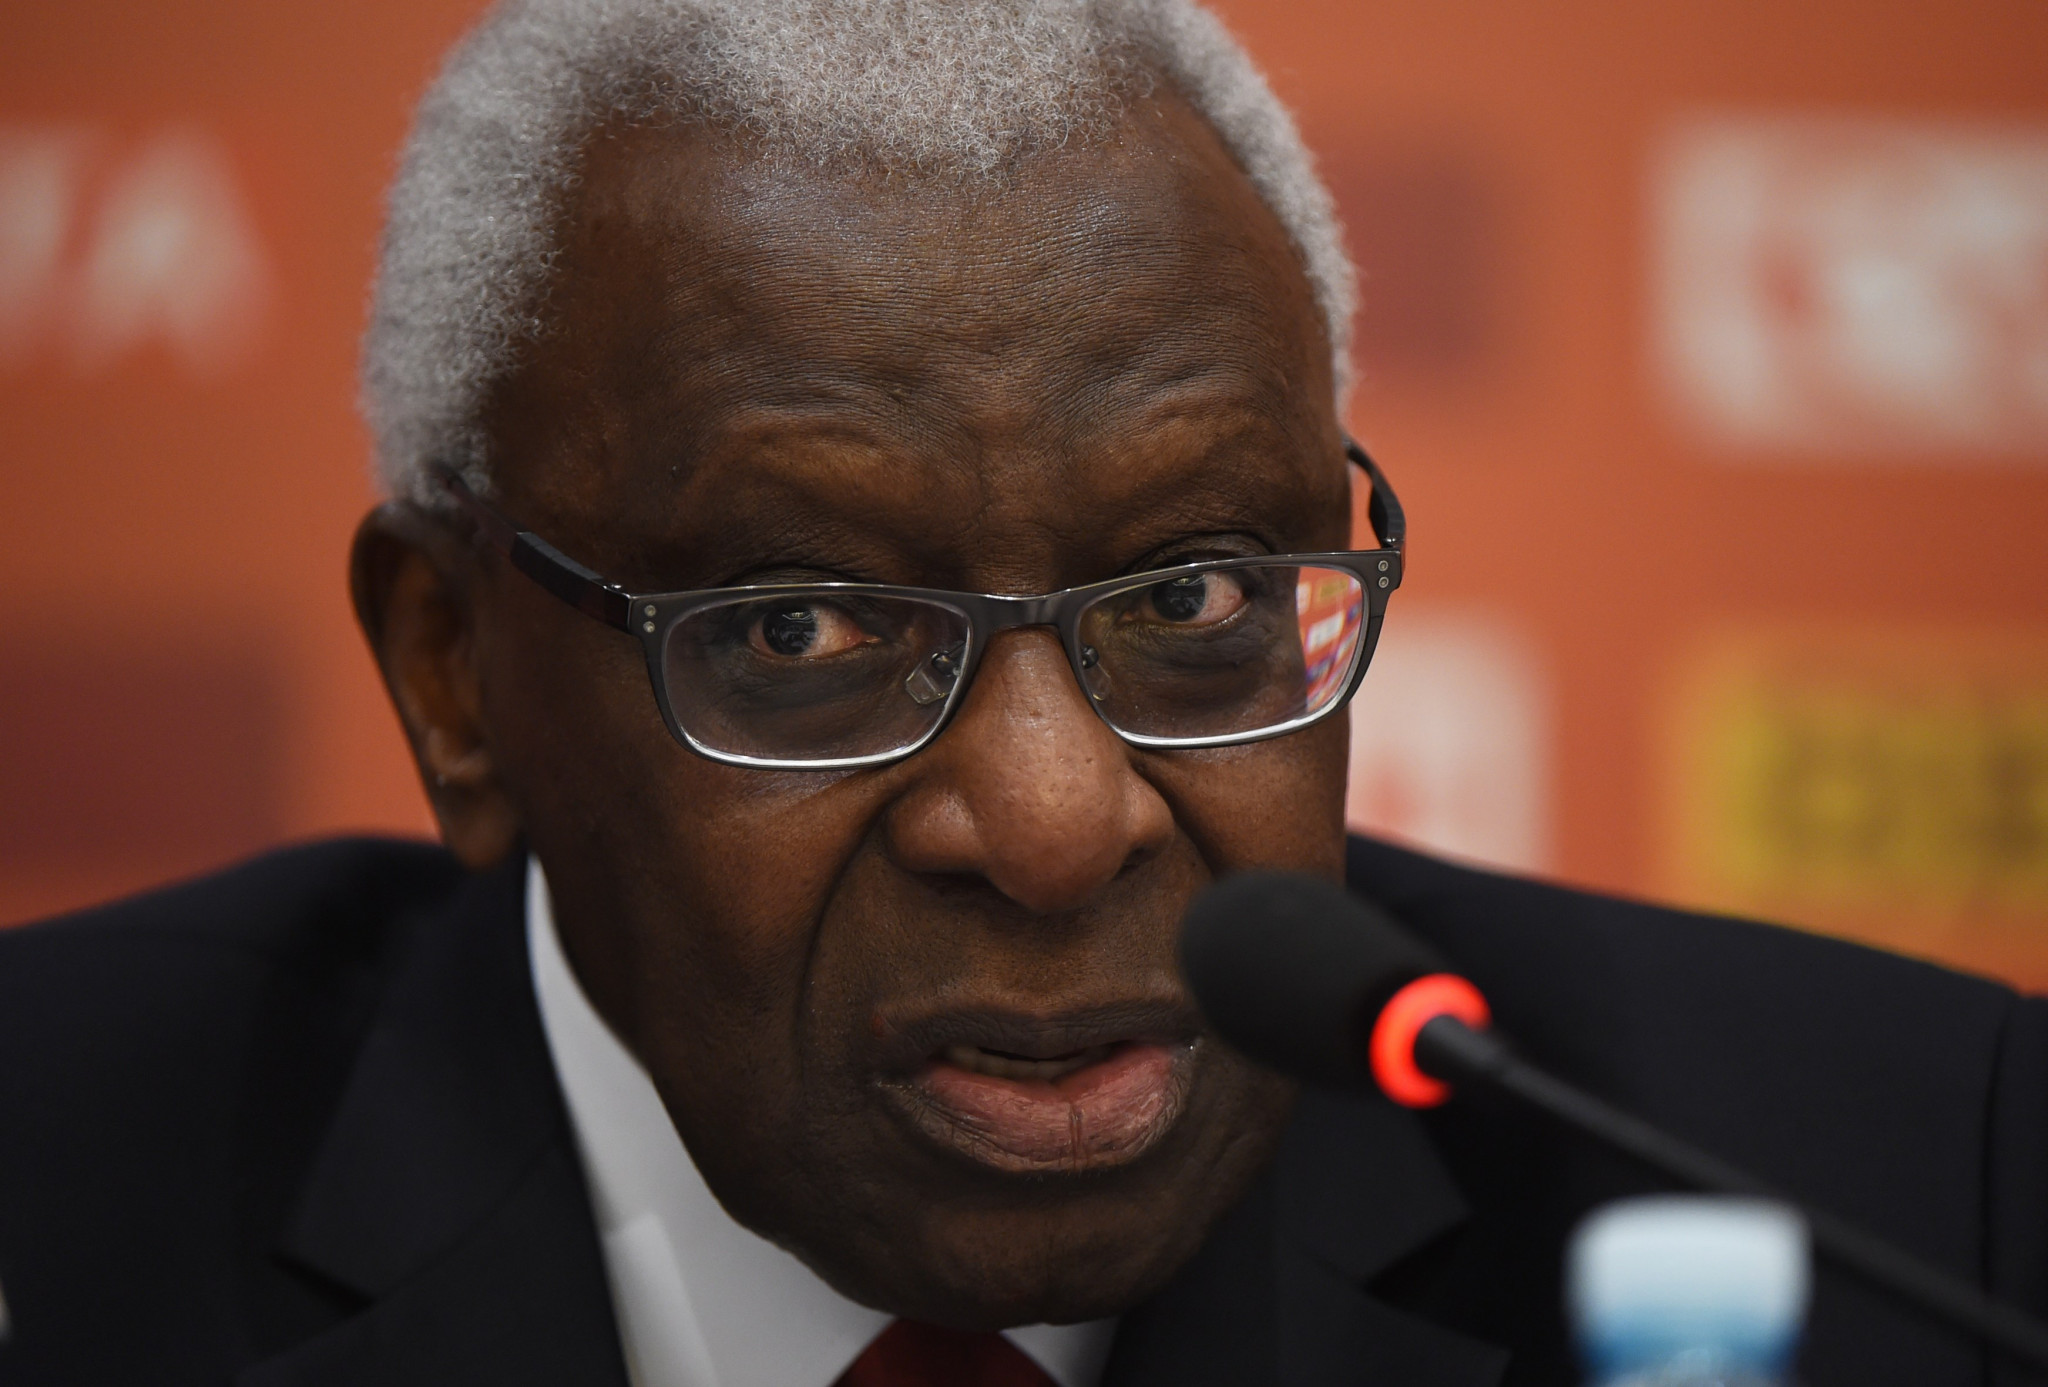 France's financial prosecutor has recommended that Lamine Diack, the former President of the IAAF, and his son Papa Massata Diack stand trial for alleged corruption and money-laundering ©Getty Images